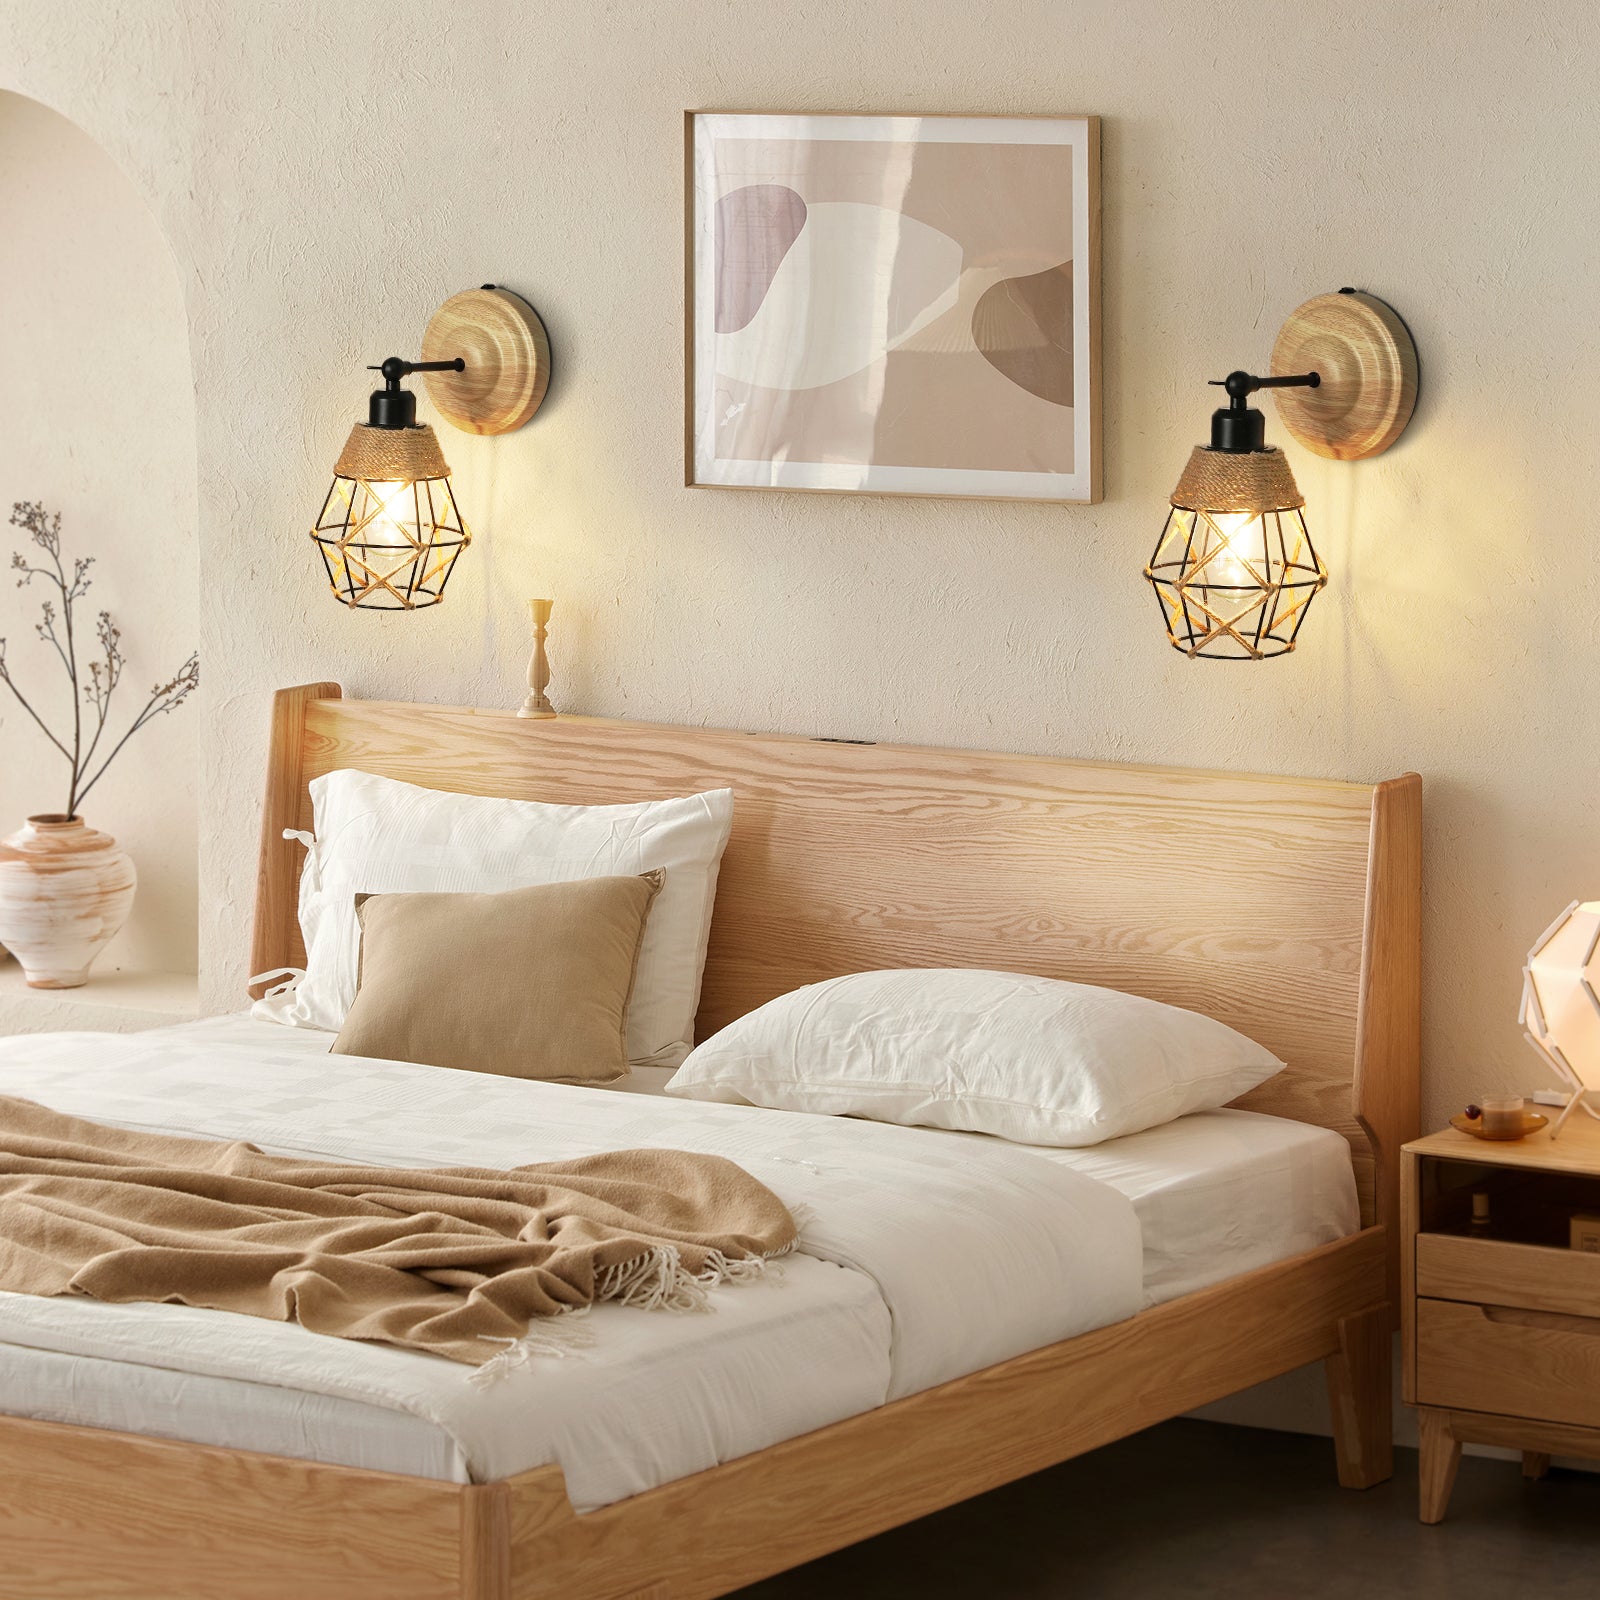 N06 Country Style Battery Operated Wall Sconces for Bedroom